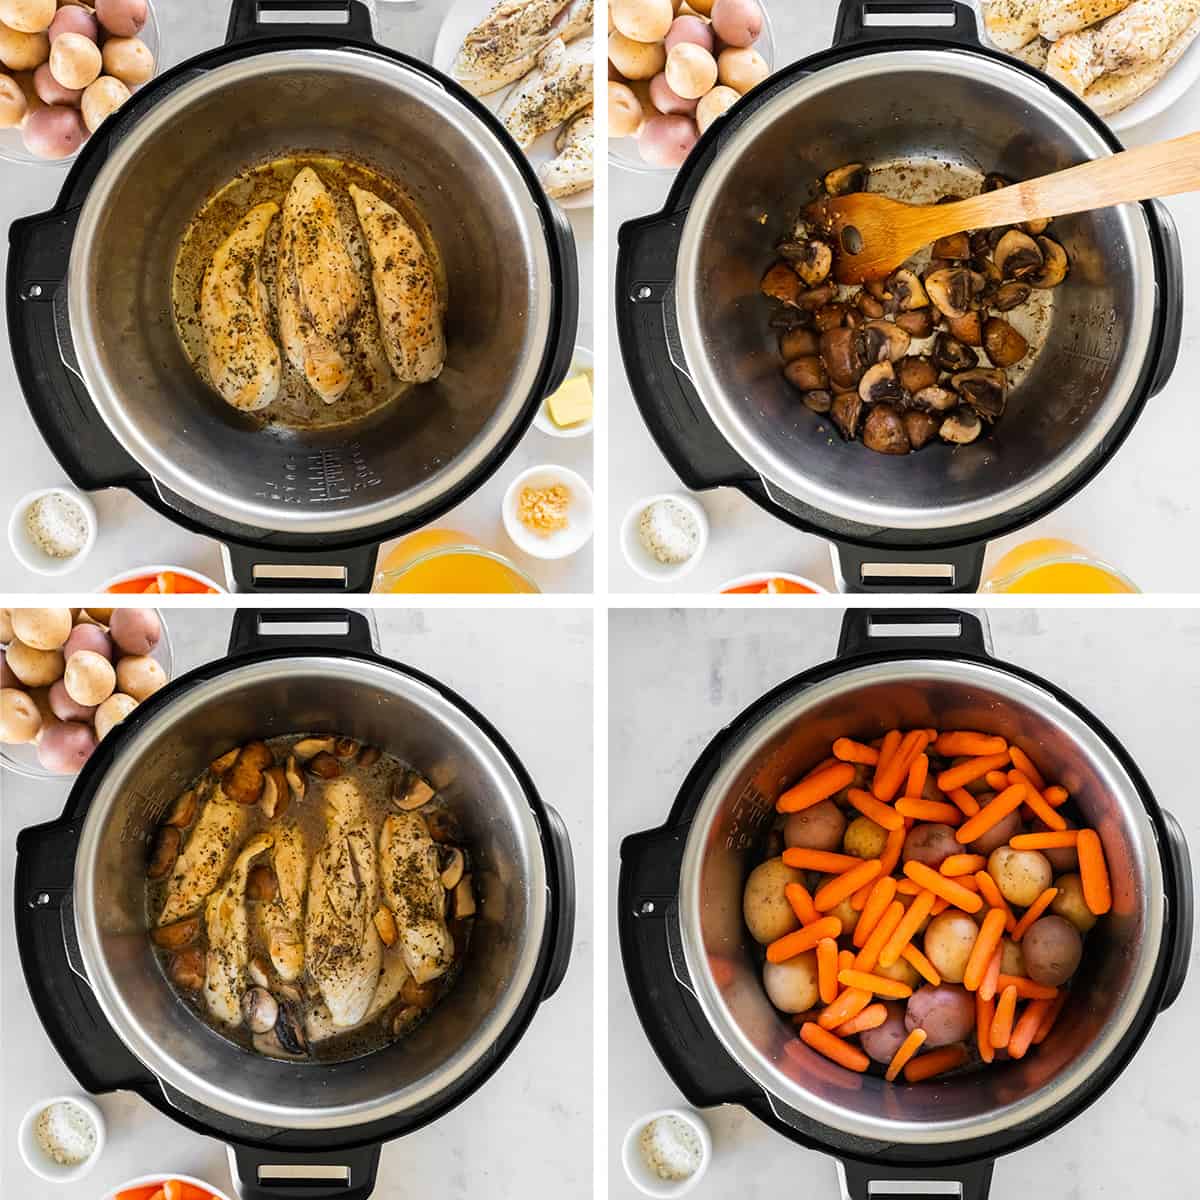 Chicken, mushrooms, carrots and potatoes in an Instant Pot.